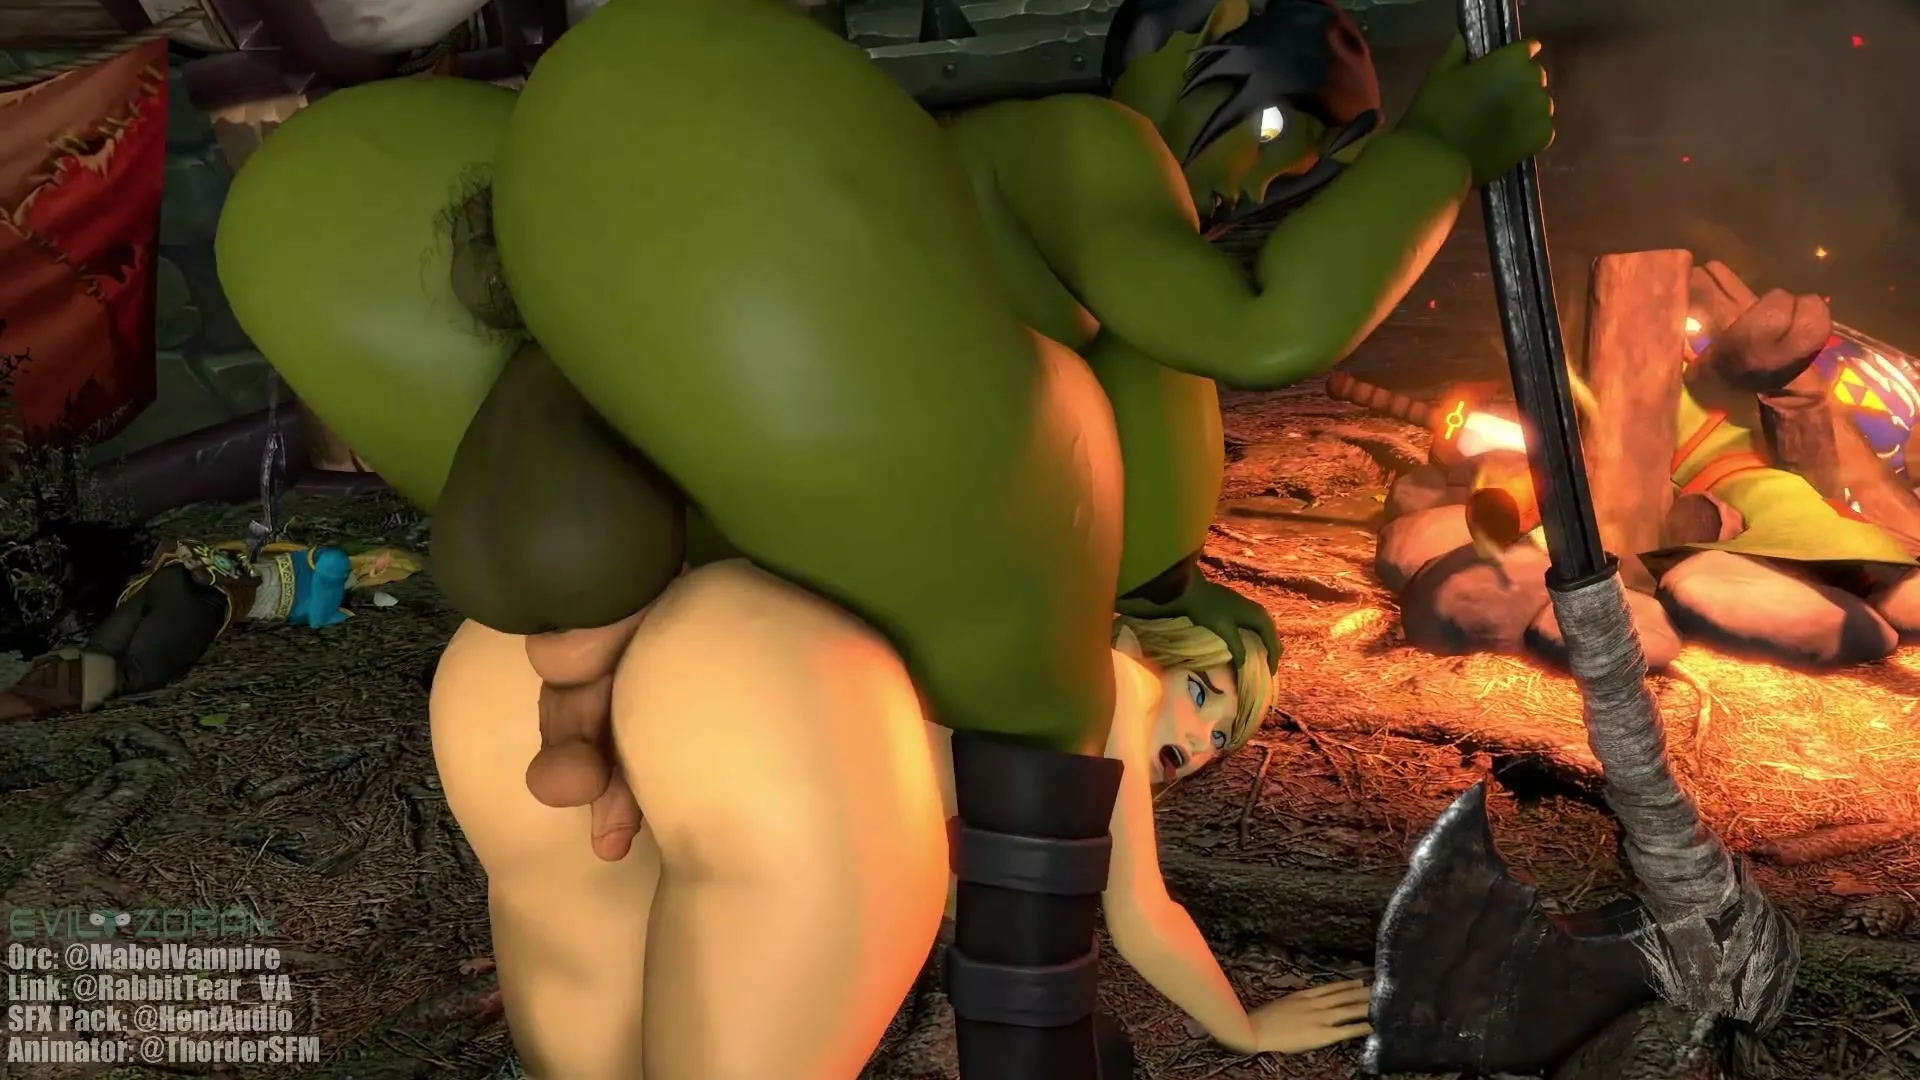 Male Female Orc Porn - Link X Female Orc